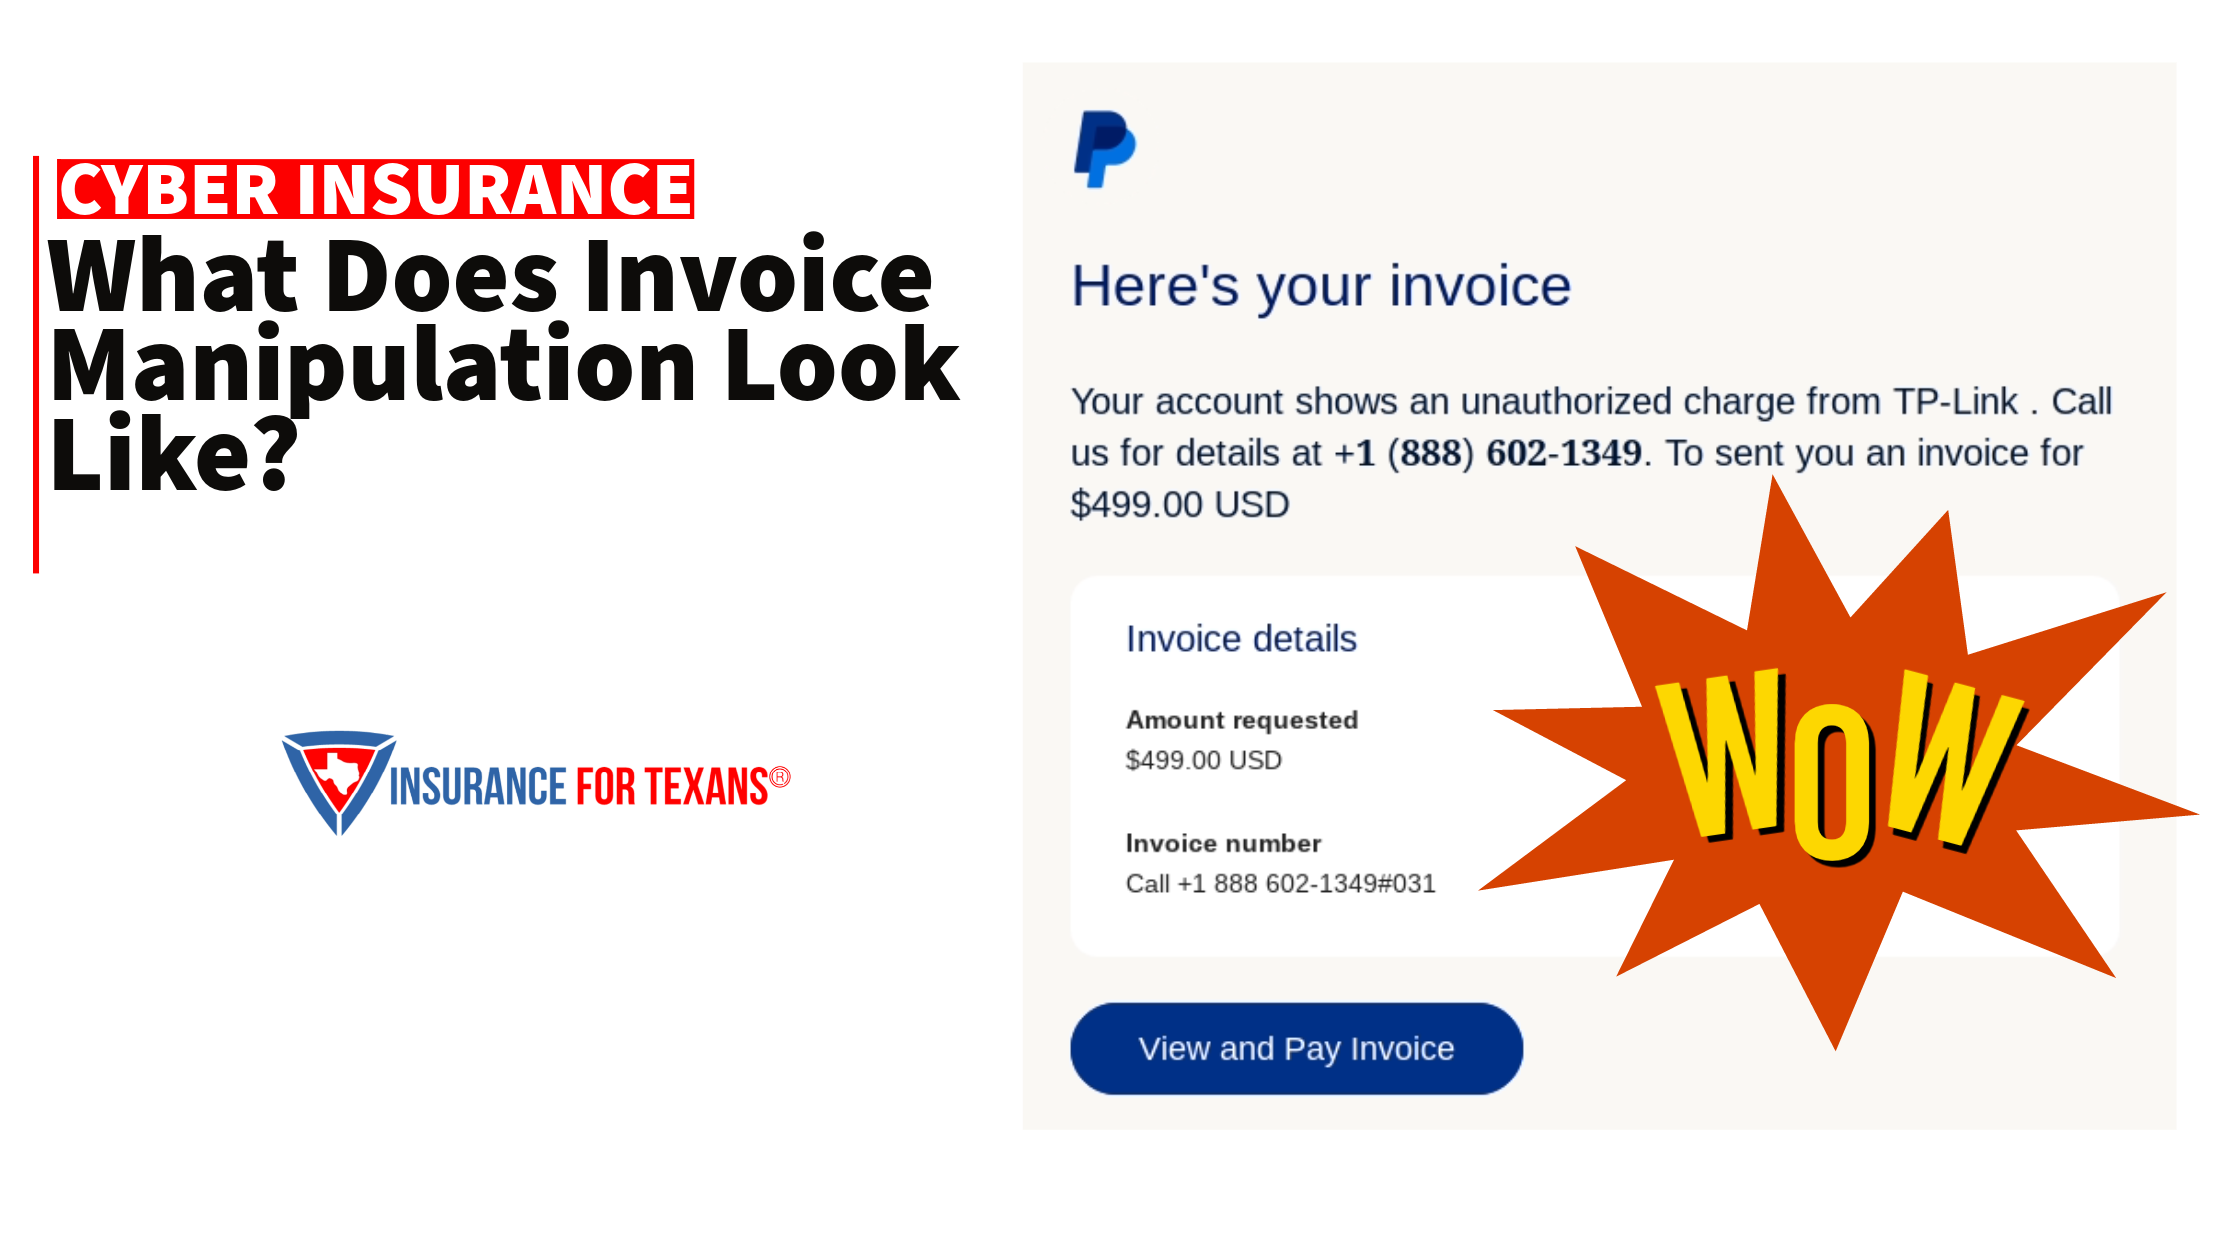 What Does Invoice Manipulation Look Like?